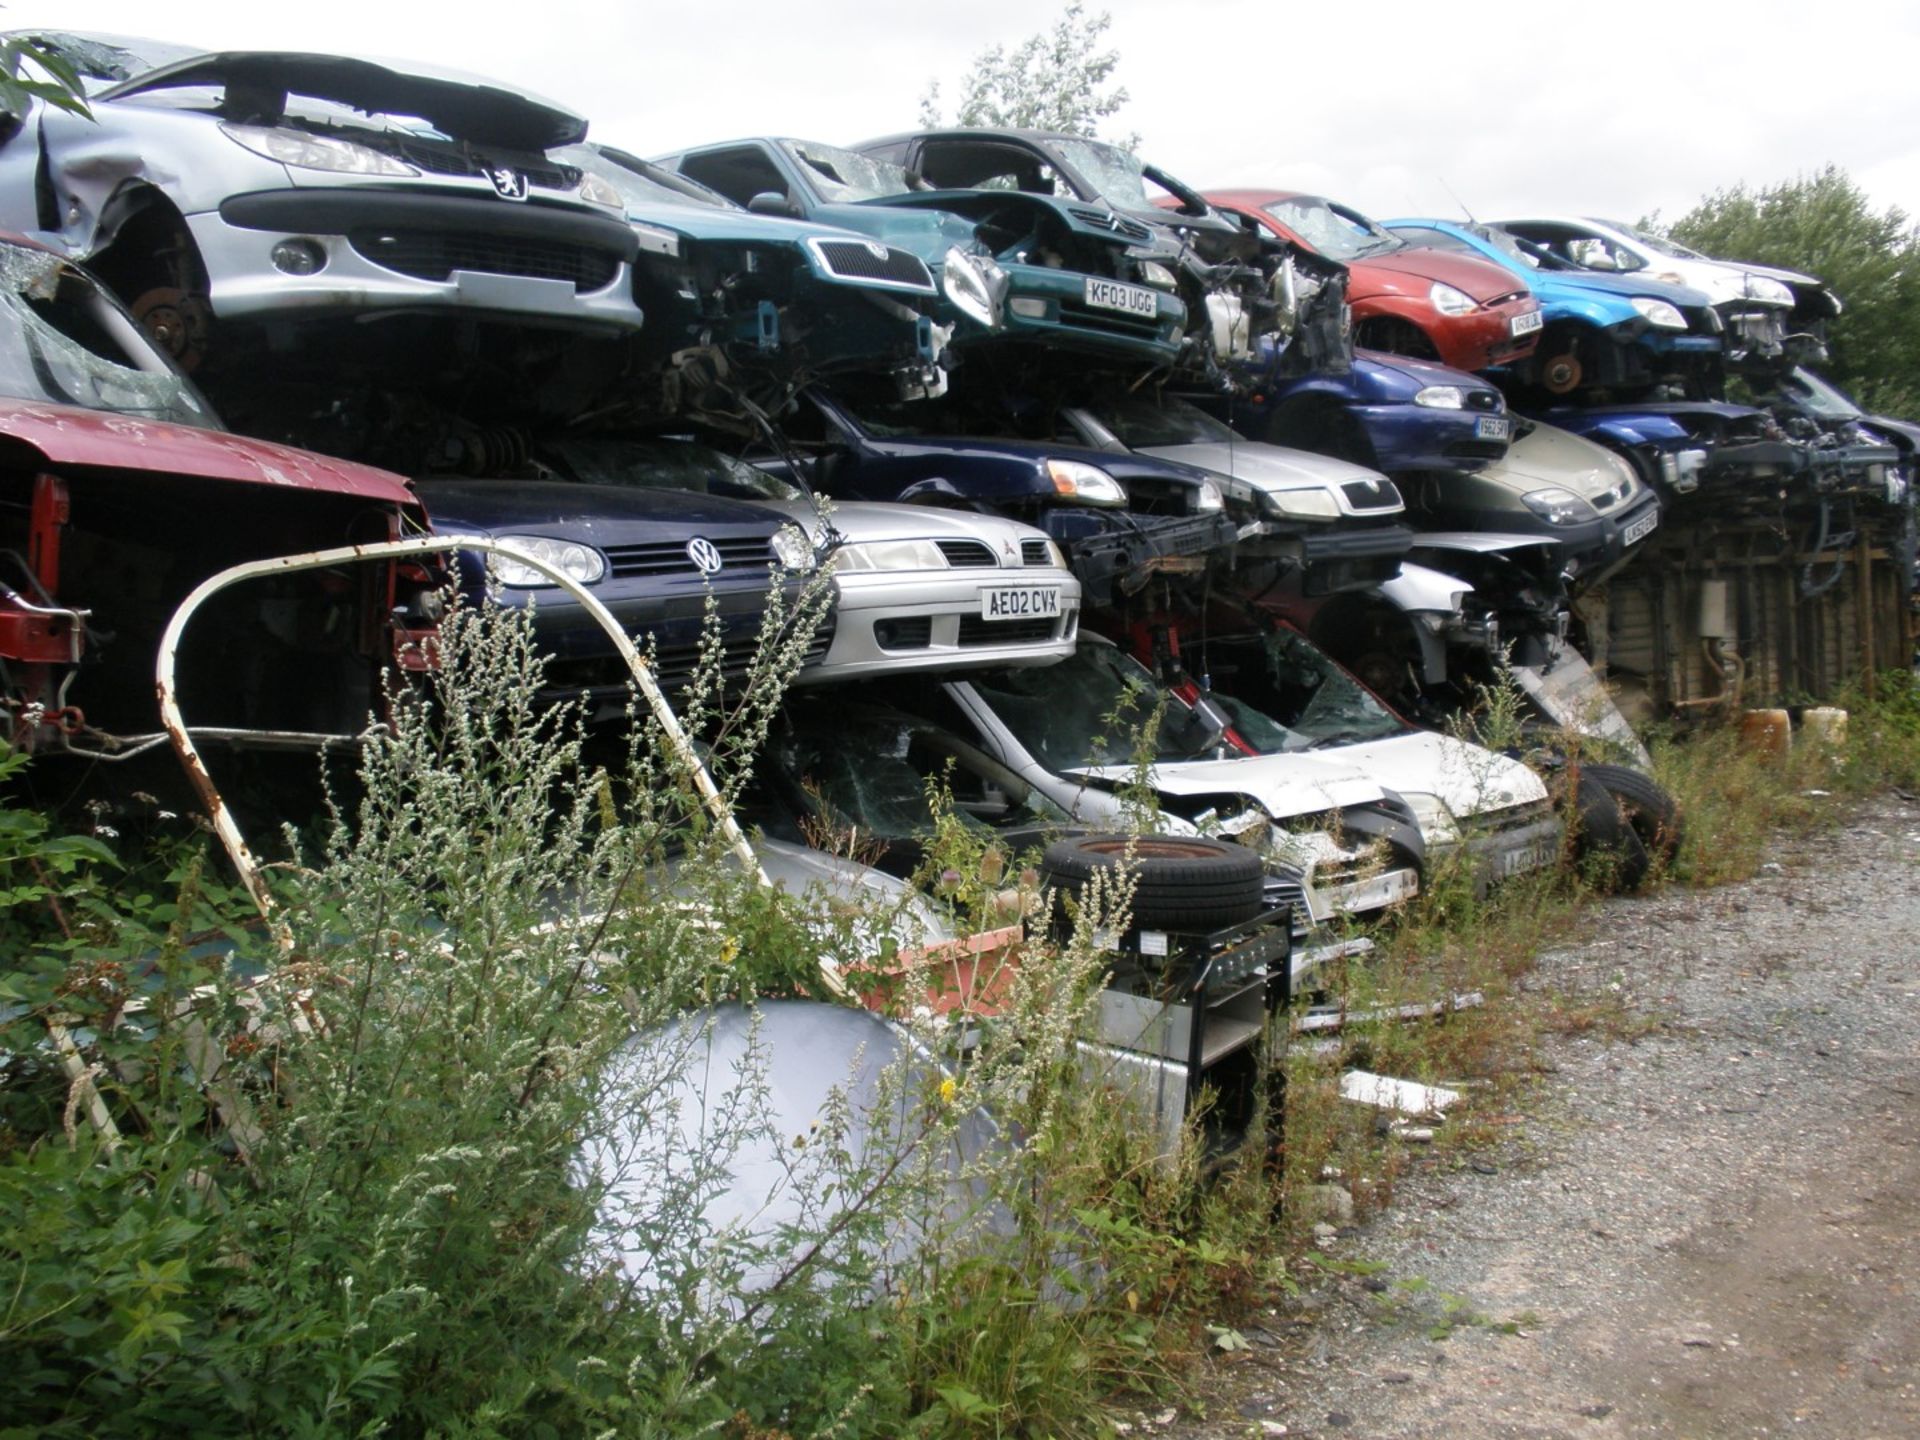 The Residual Scrap Vehicles on site together with other scrap hidden in the undergrowth. To include